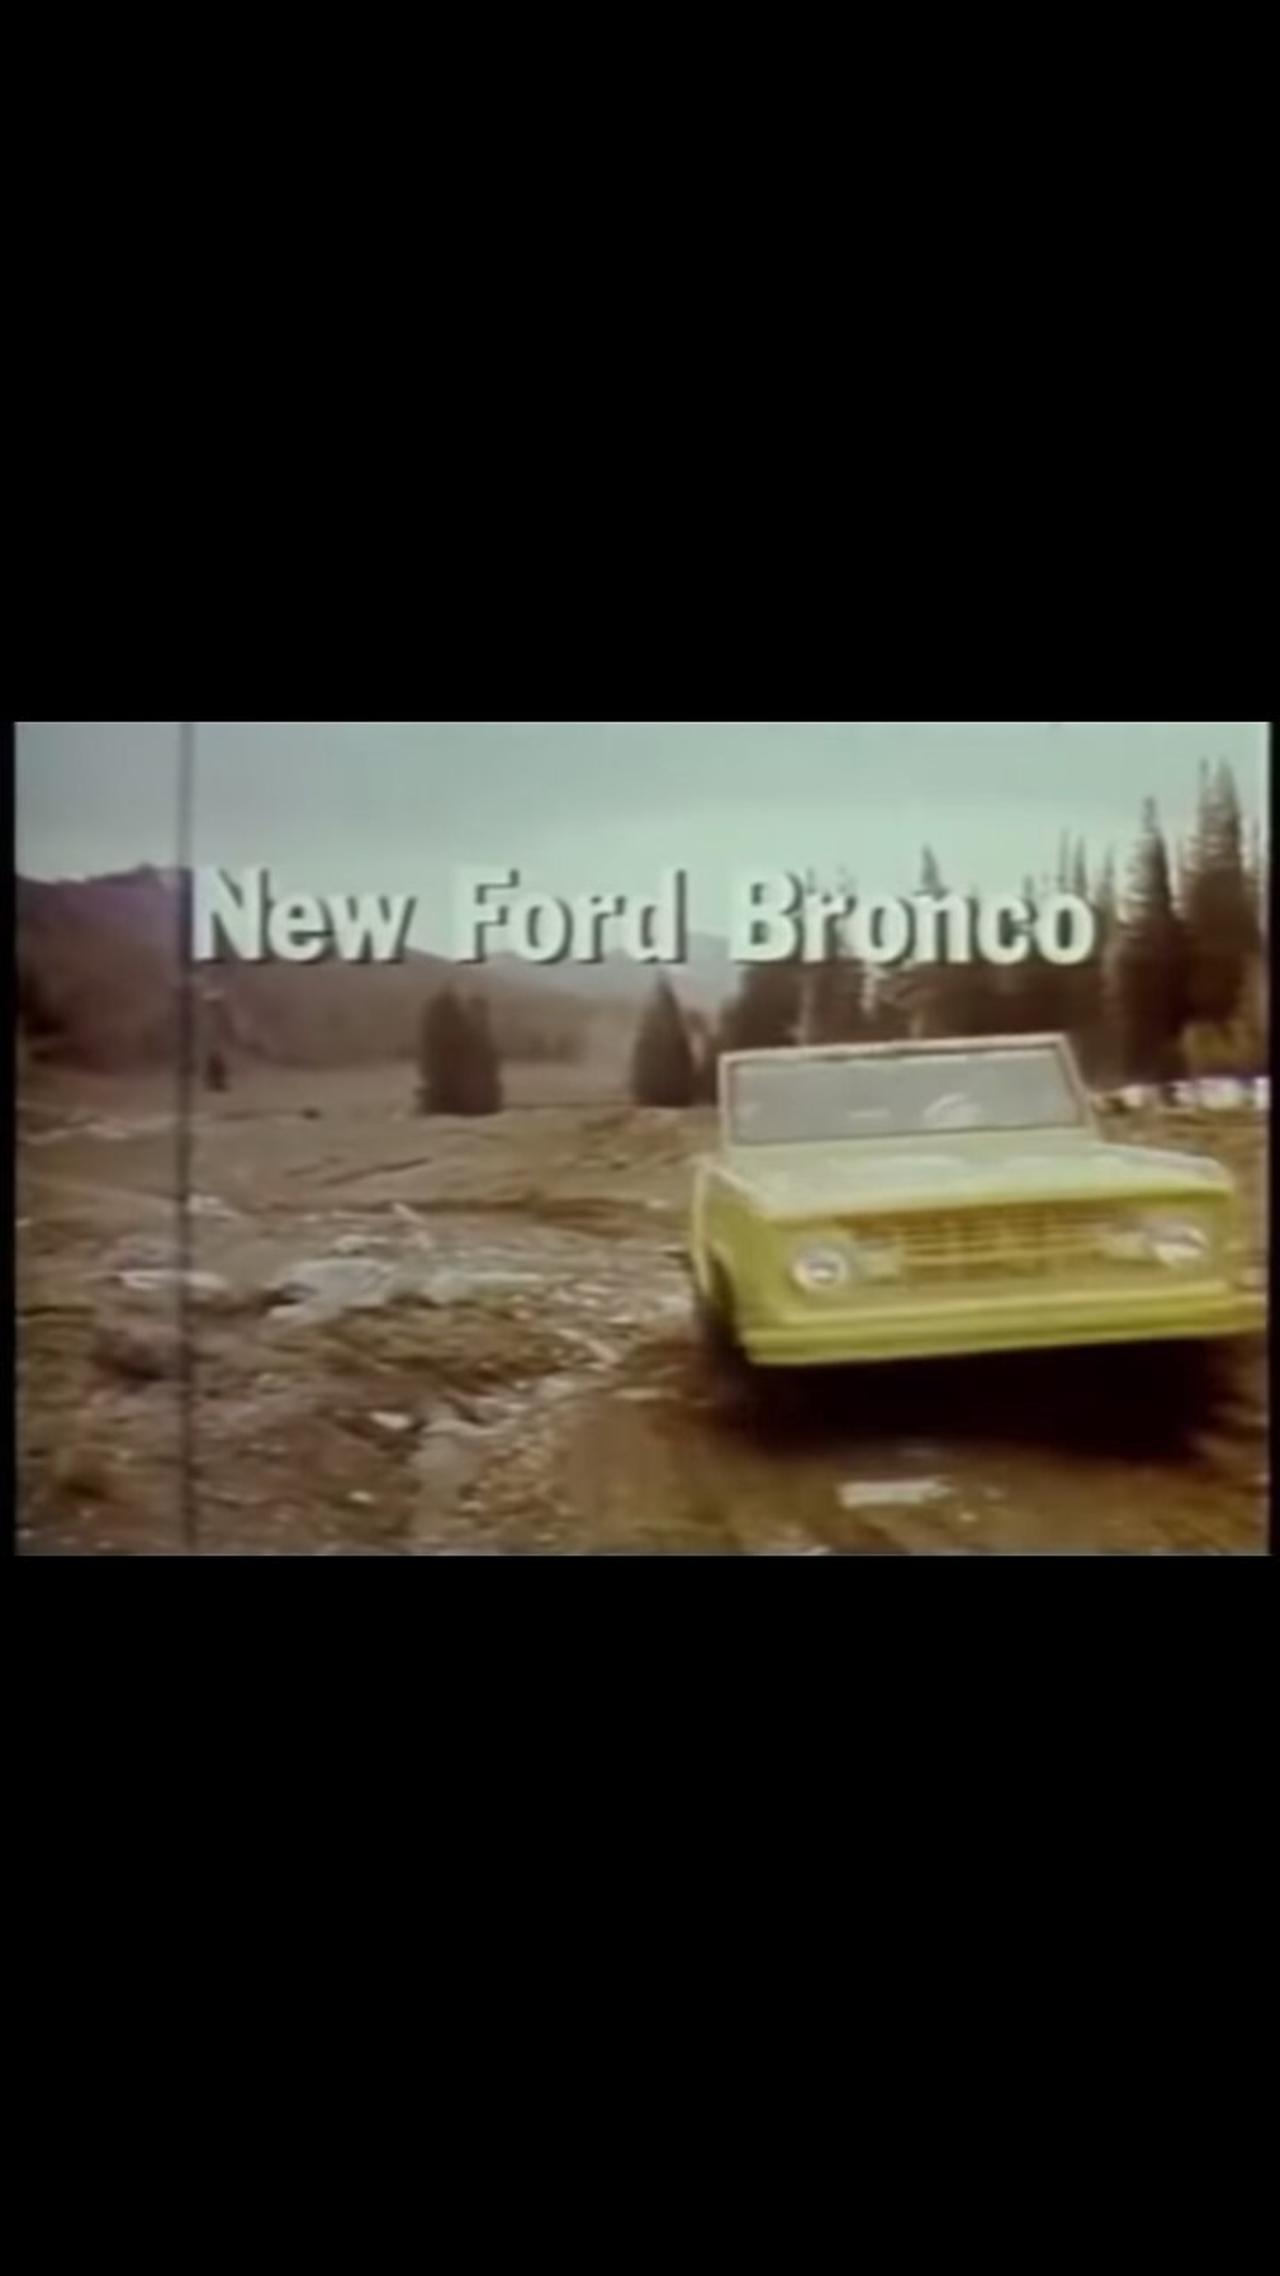 Ford Bronco commercial from 1966